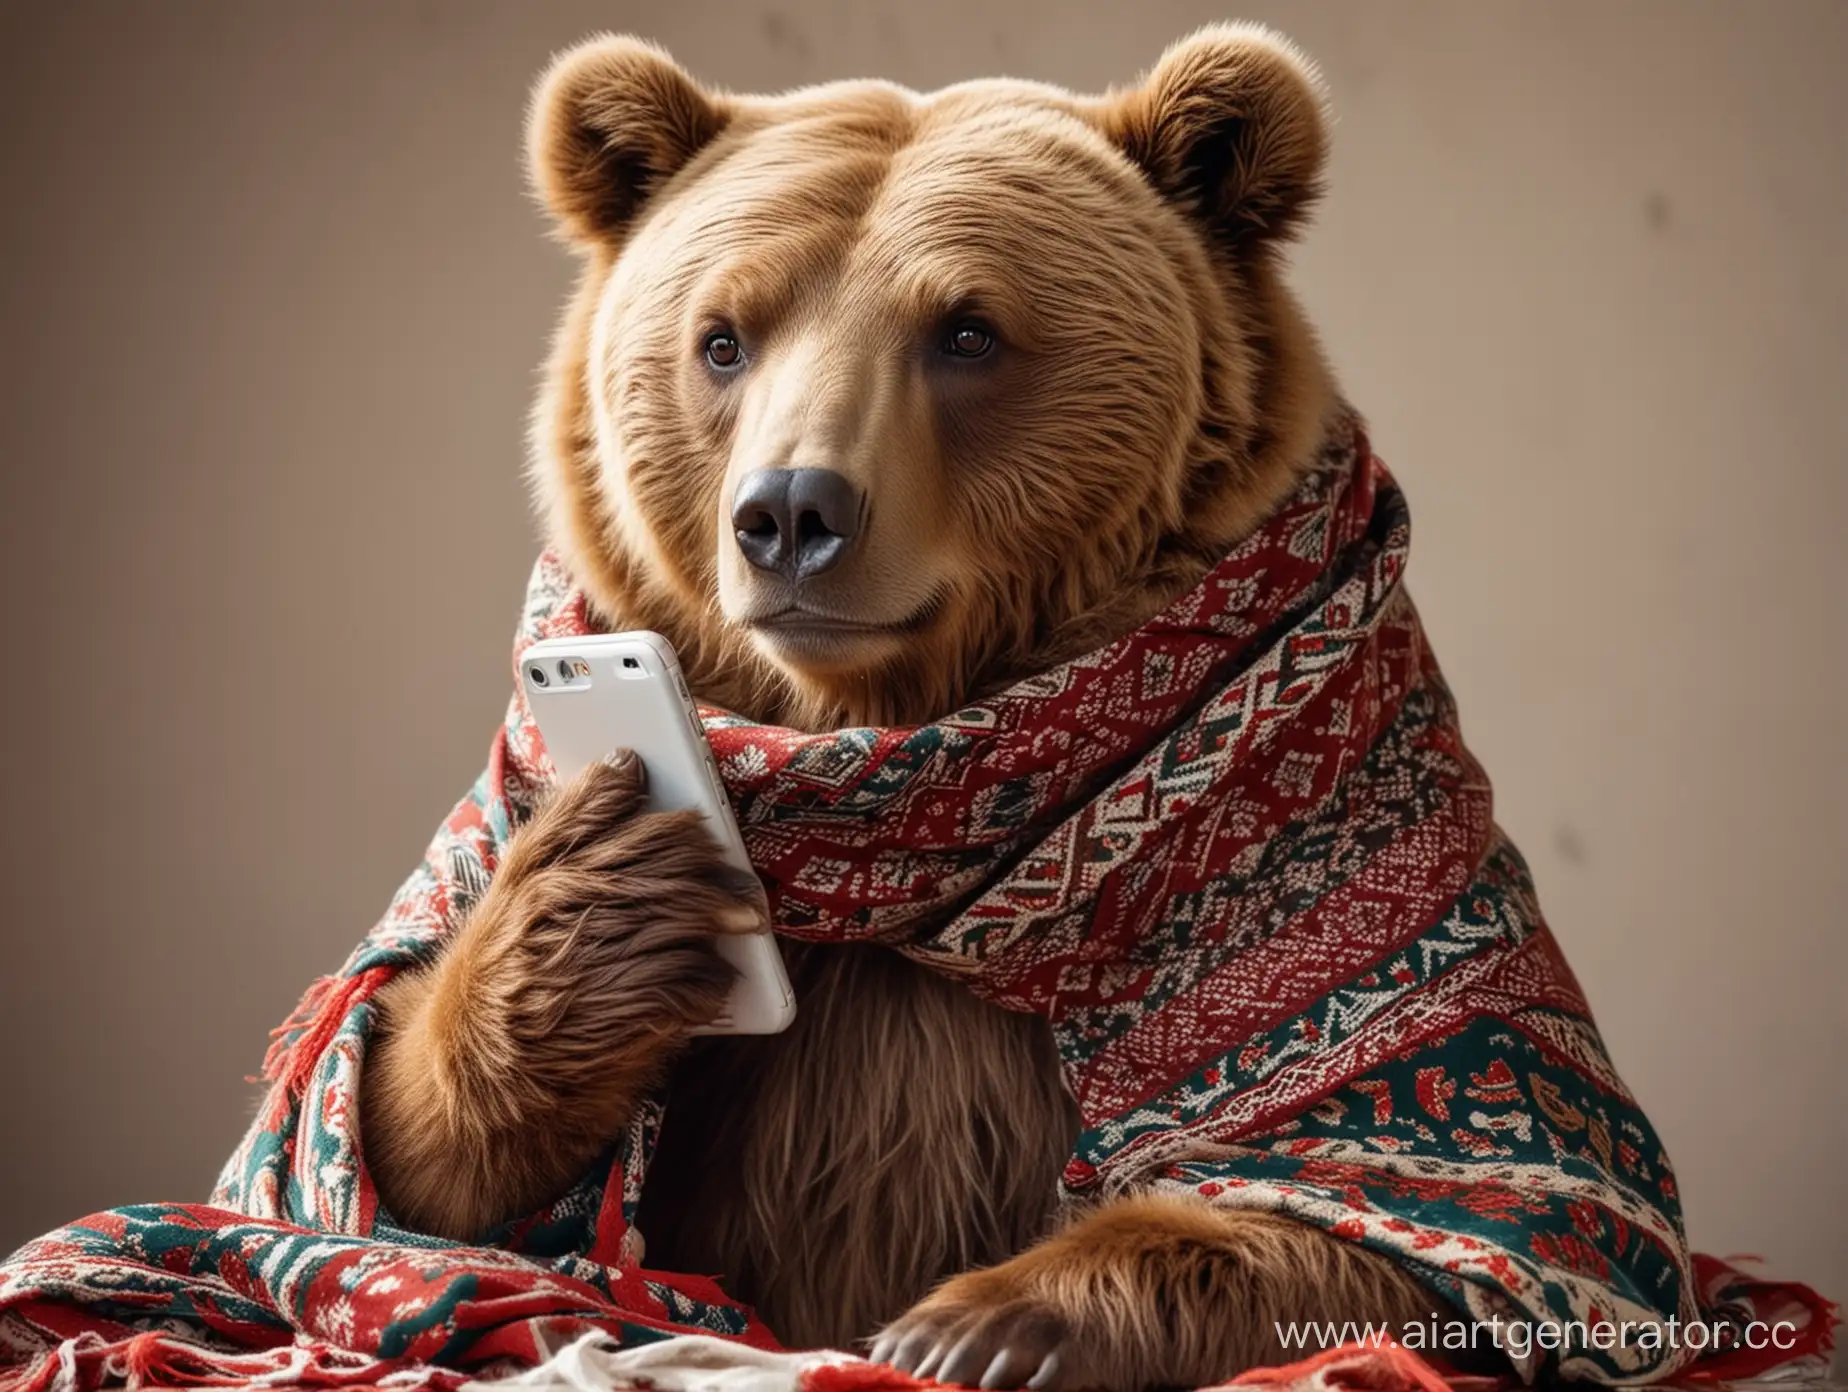 Russian-Scarf-Bear-with-Phone-Adorable-Brown-Bear-in-Traditional-Scarf-Using-Smartphone